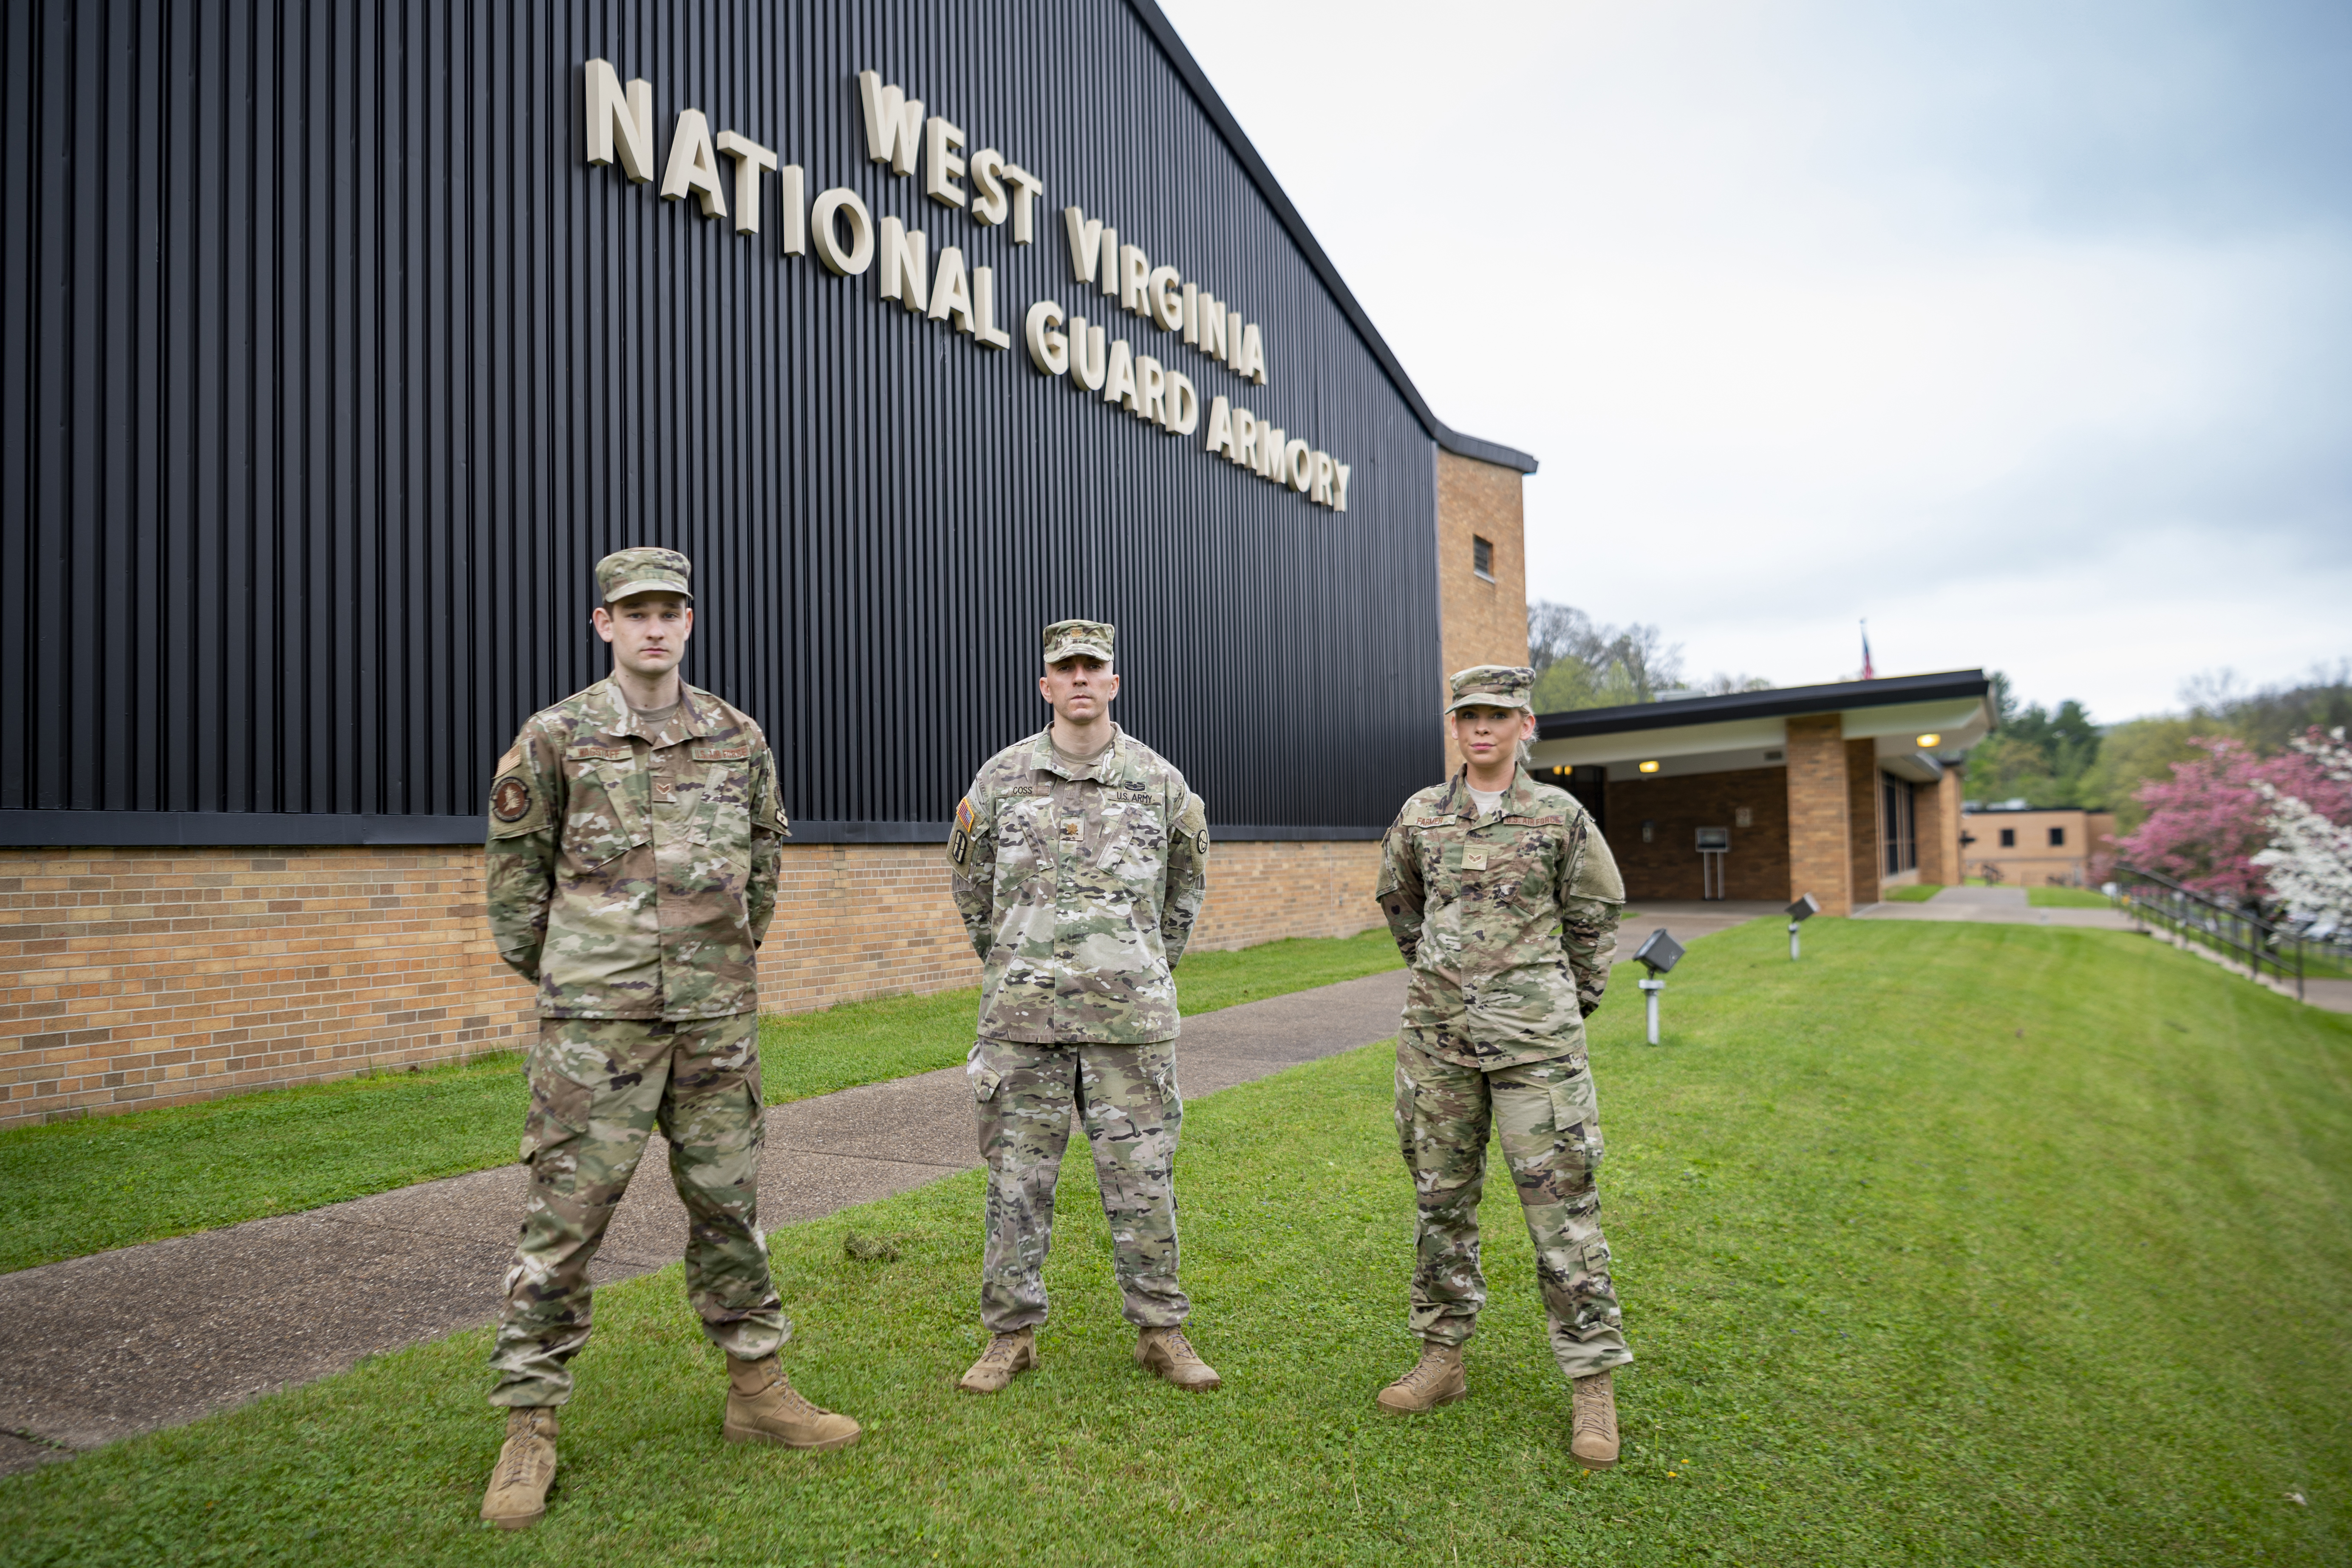 three men in camo uniforms stand in front of brick building